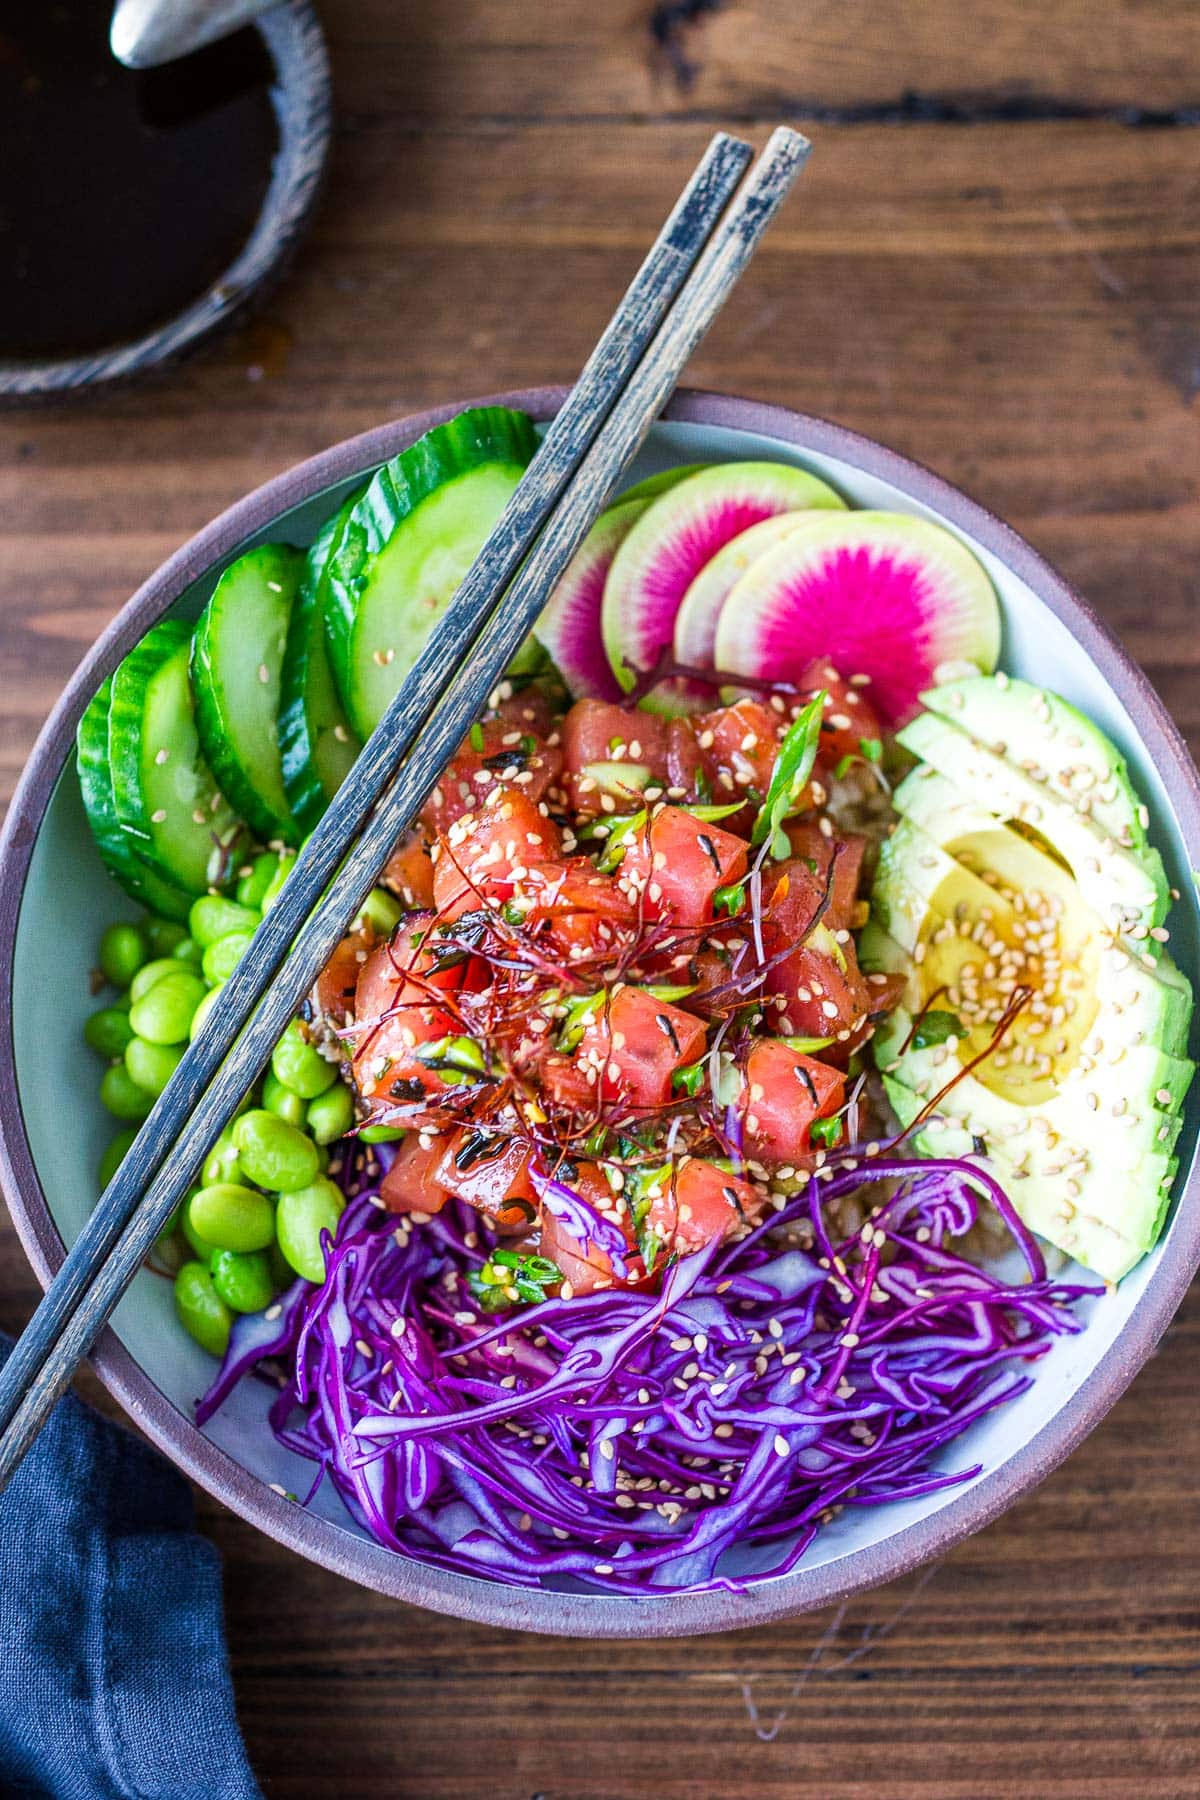 How to make your own homemade Hawaiian-style Poke Bowls made with fresh ahi tuna, rice, avocado, cucumbers, shredded cabbage, edamame, and a bright and flavorful Poke dressing.